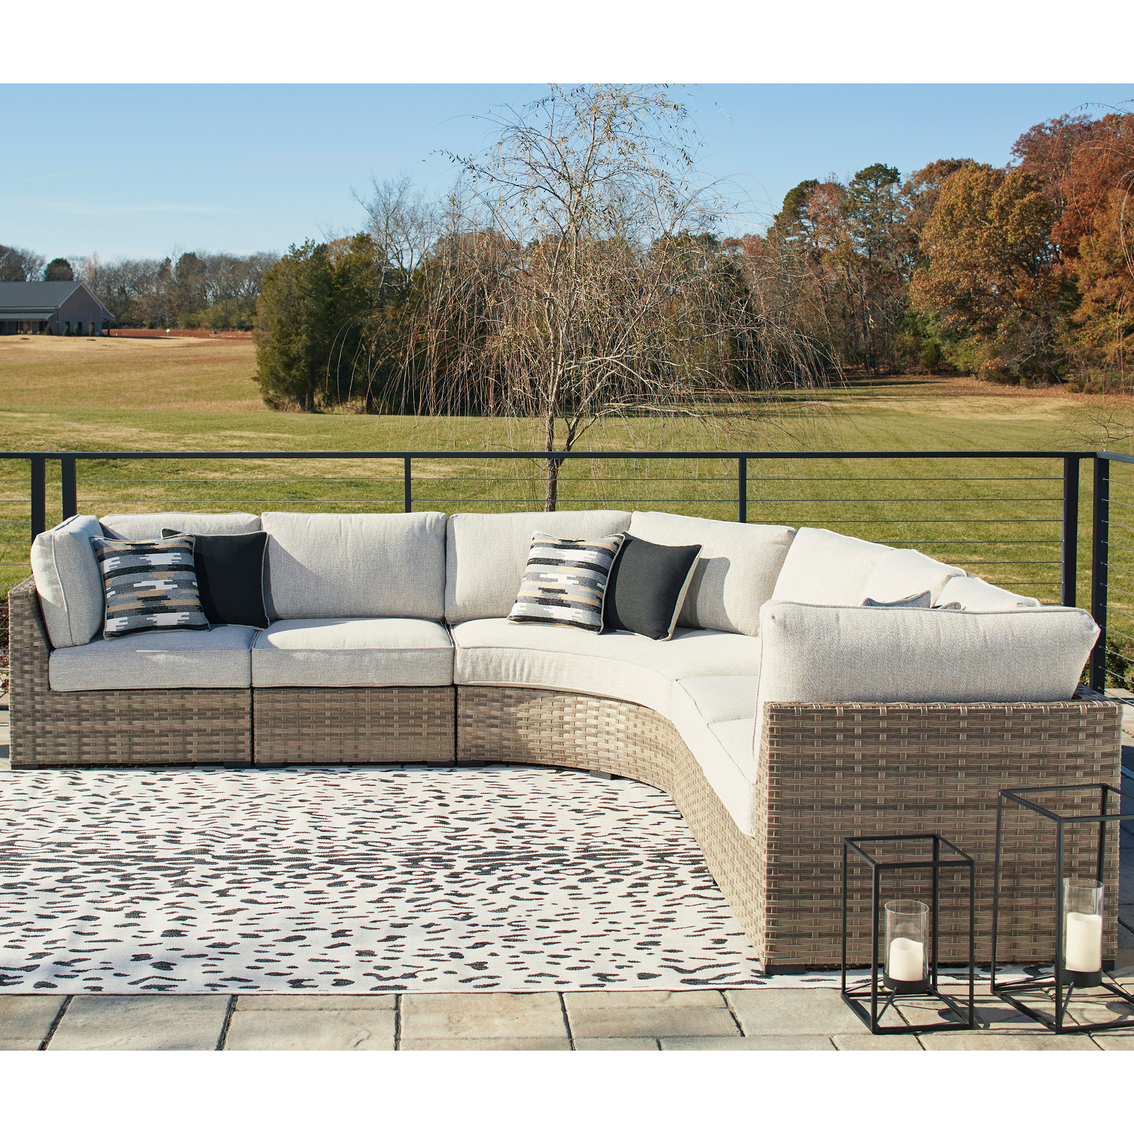 Signature Design by Ashley Calworth Outdoor 5 pc. Set - Image 1 of 4